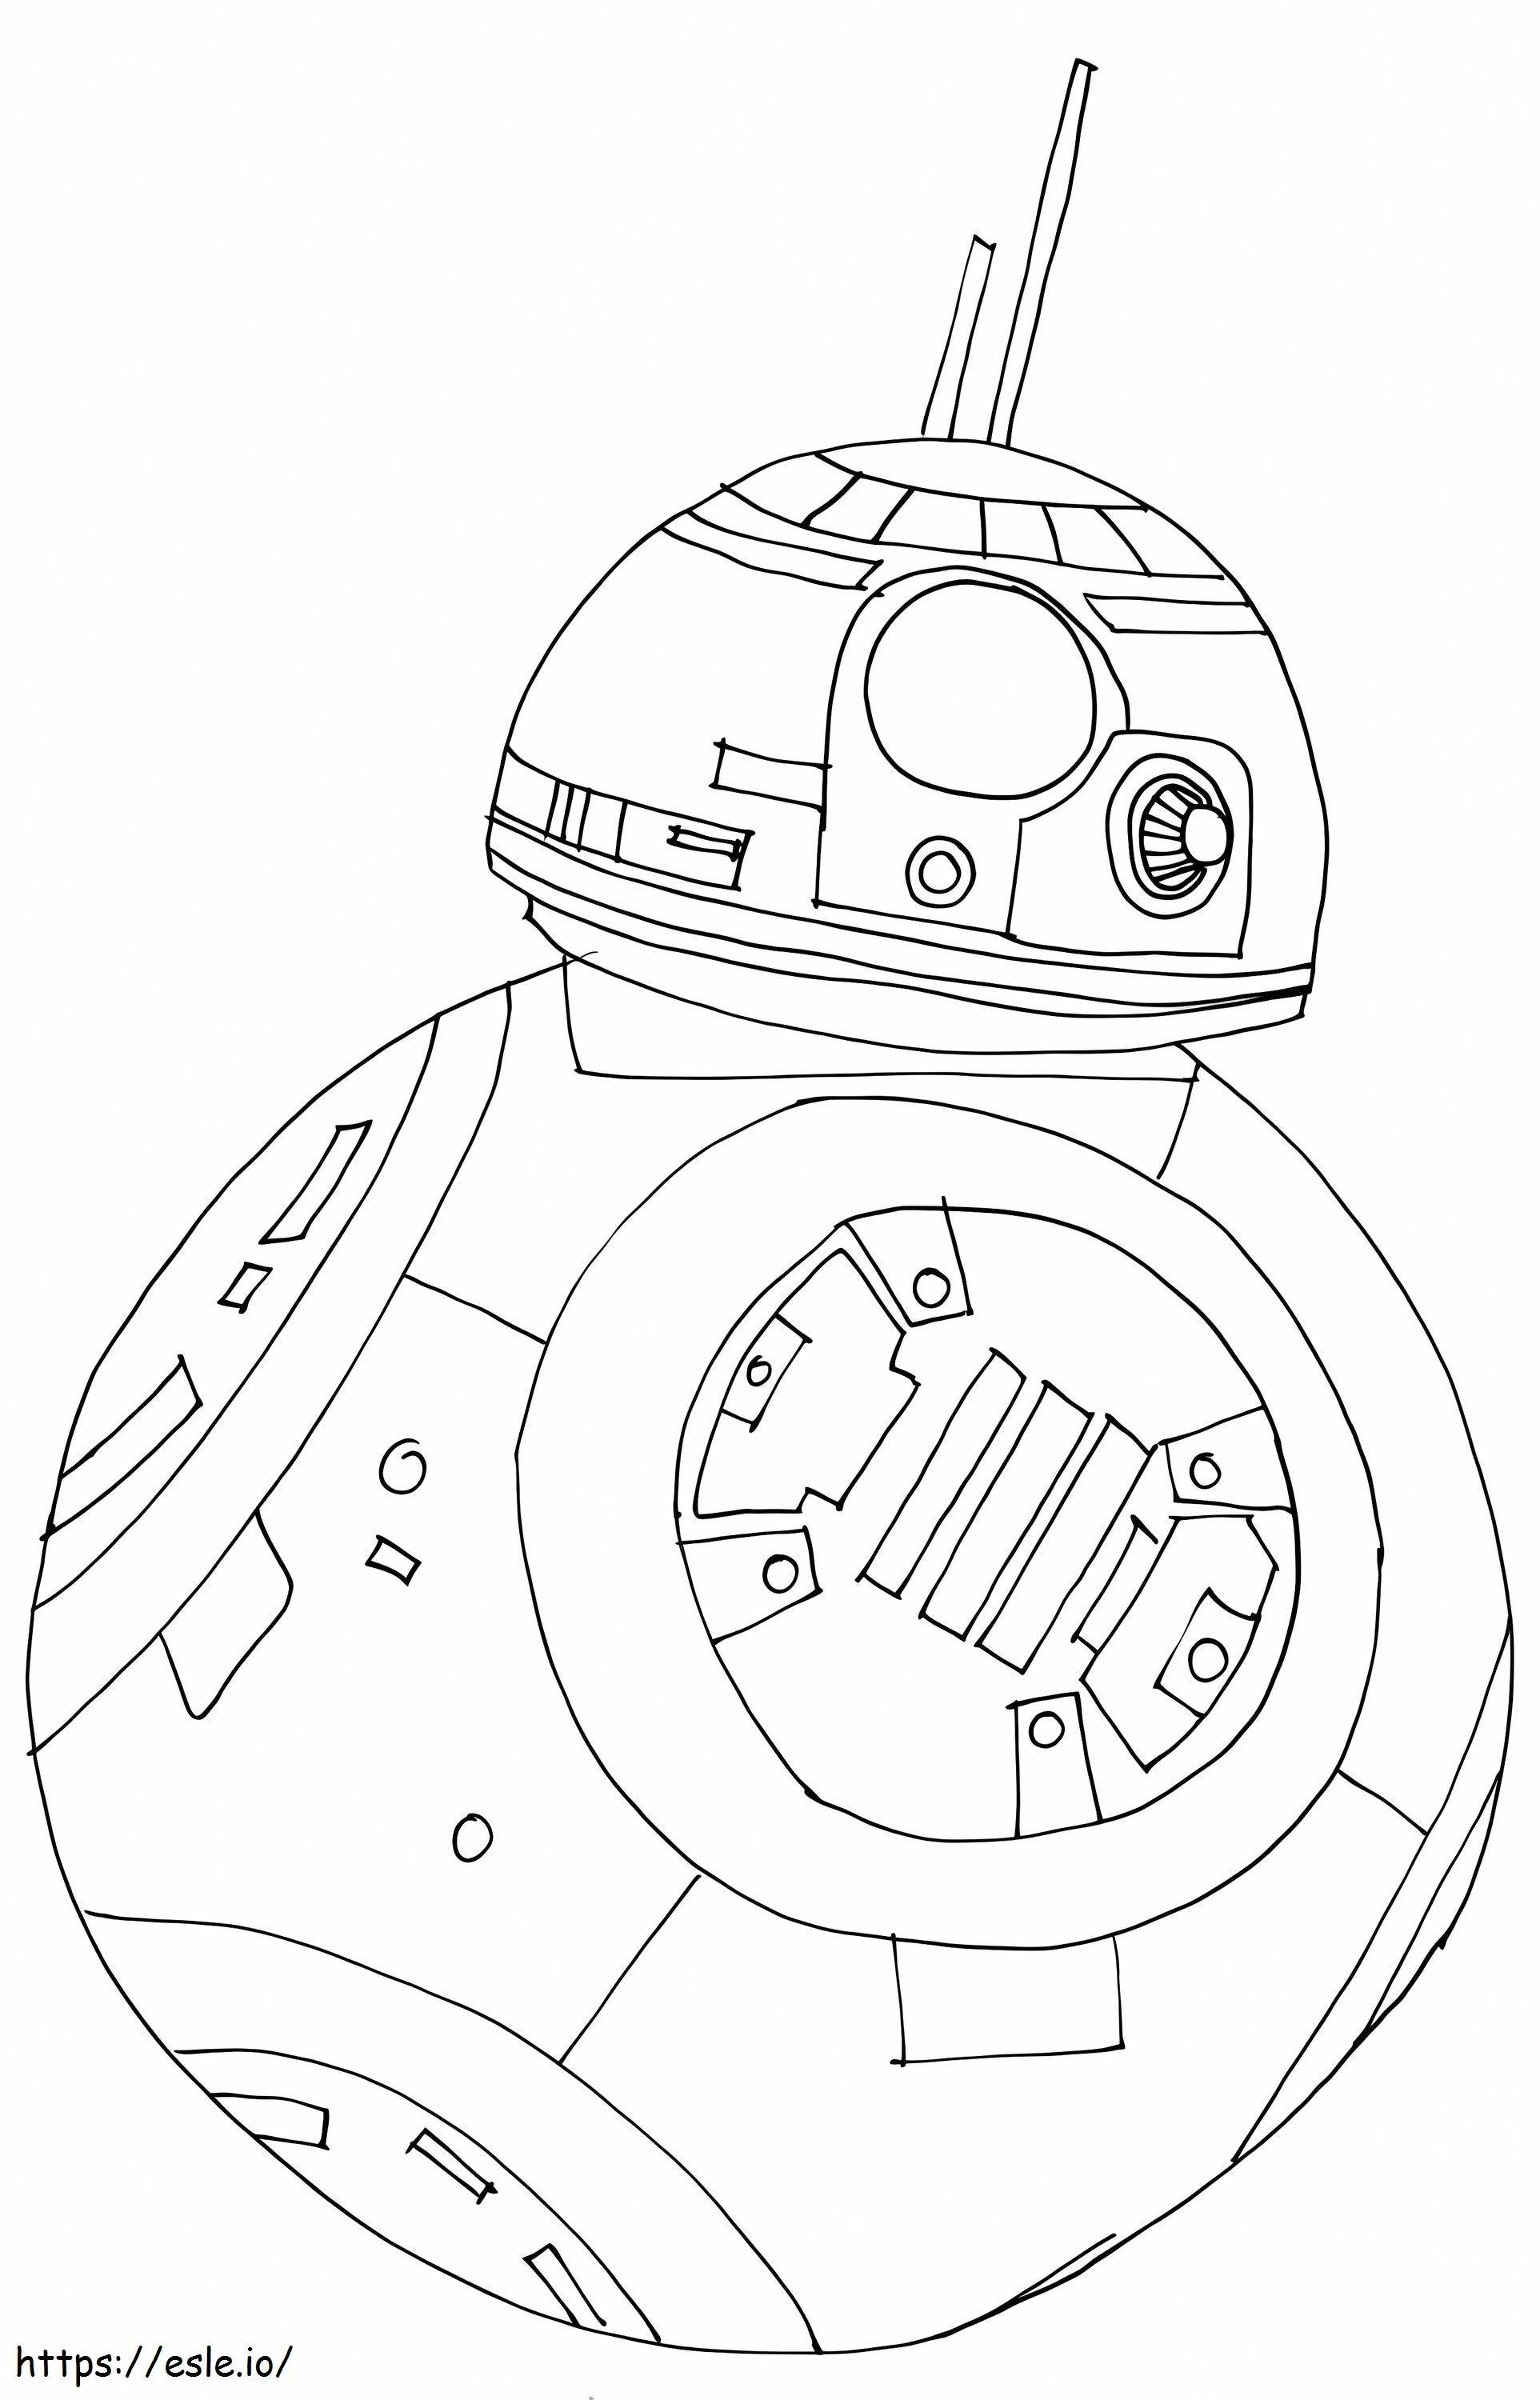 BB 8 Droid From Star Wars coloring page